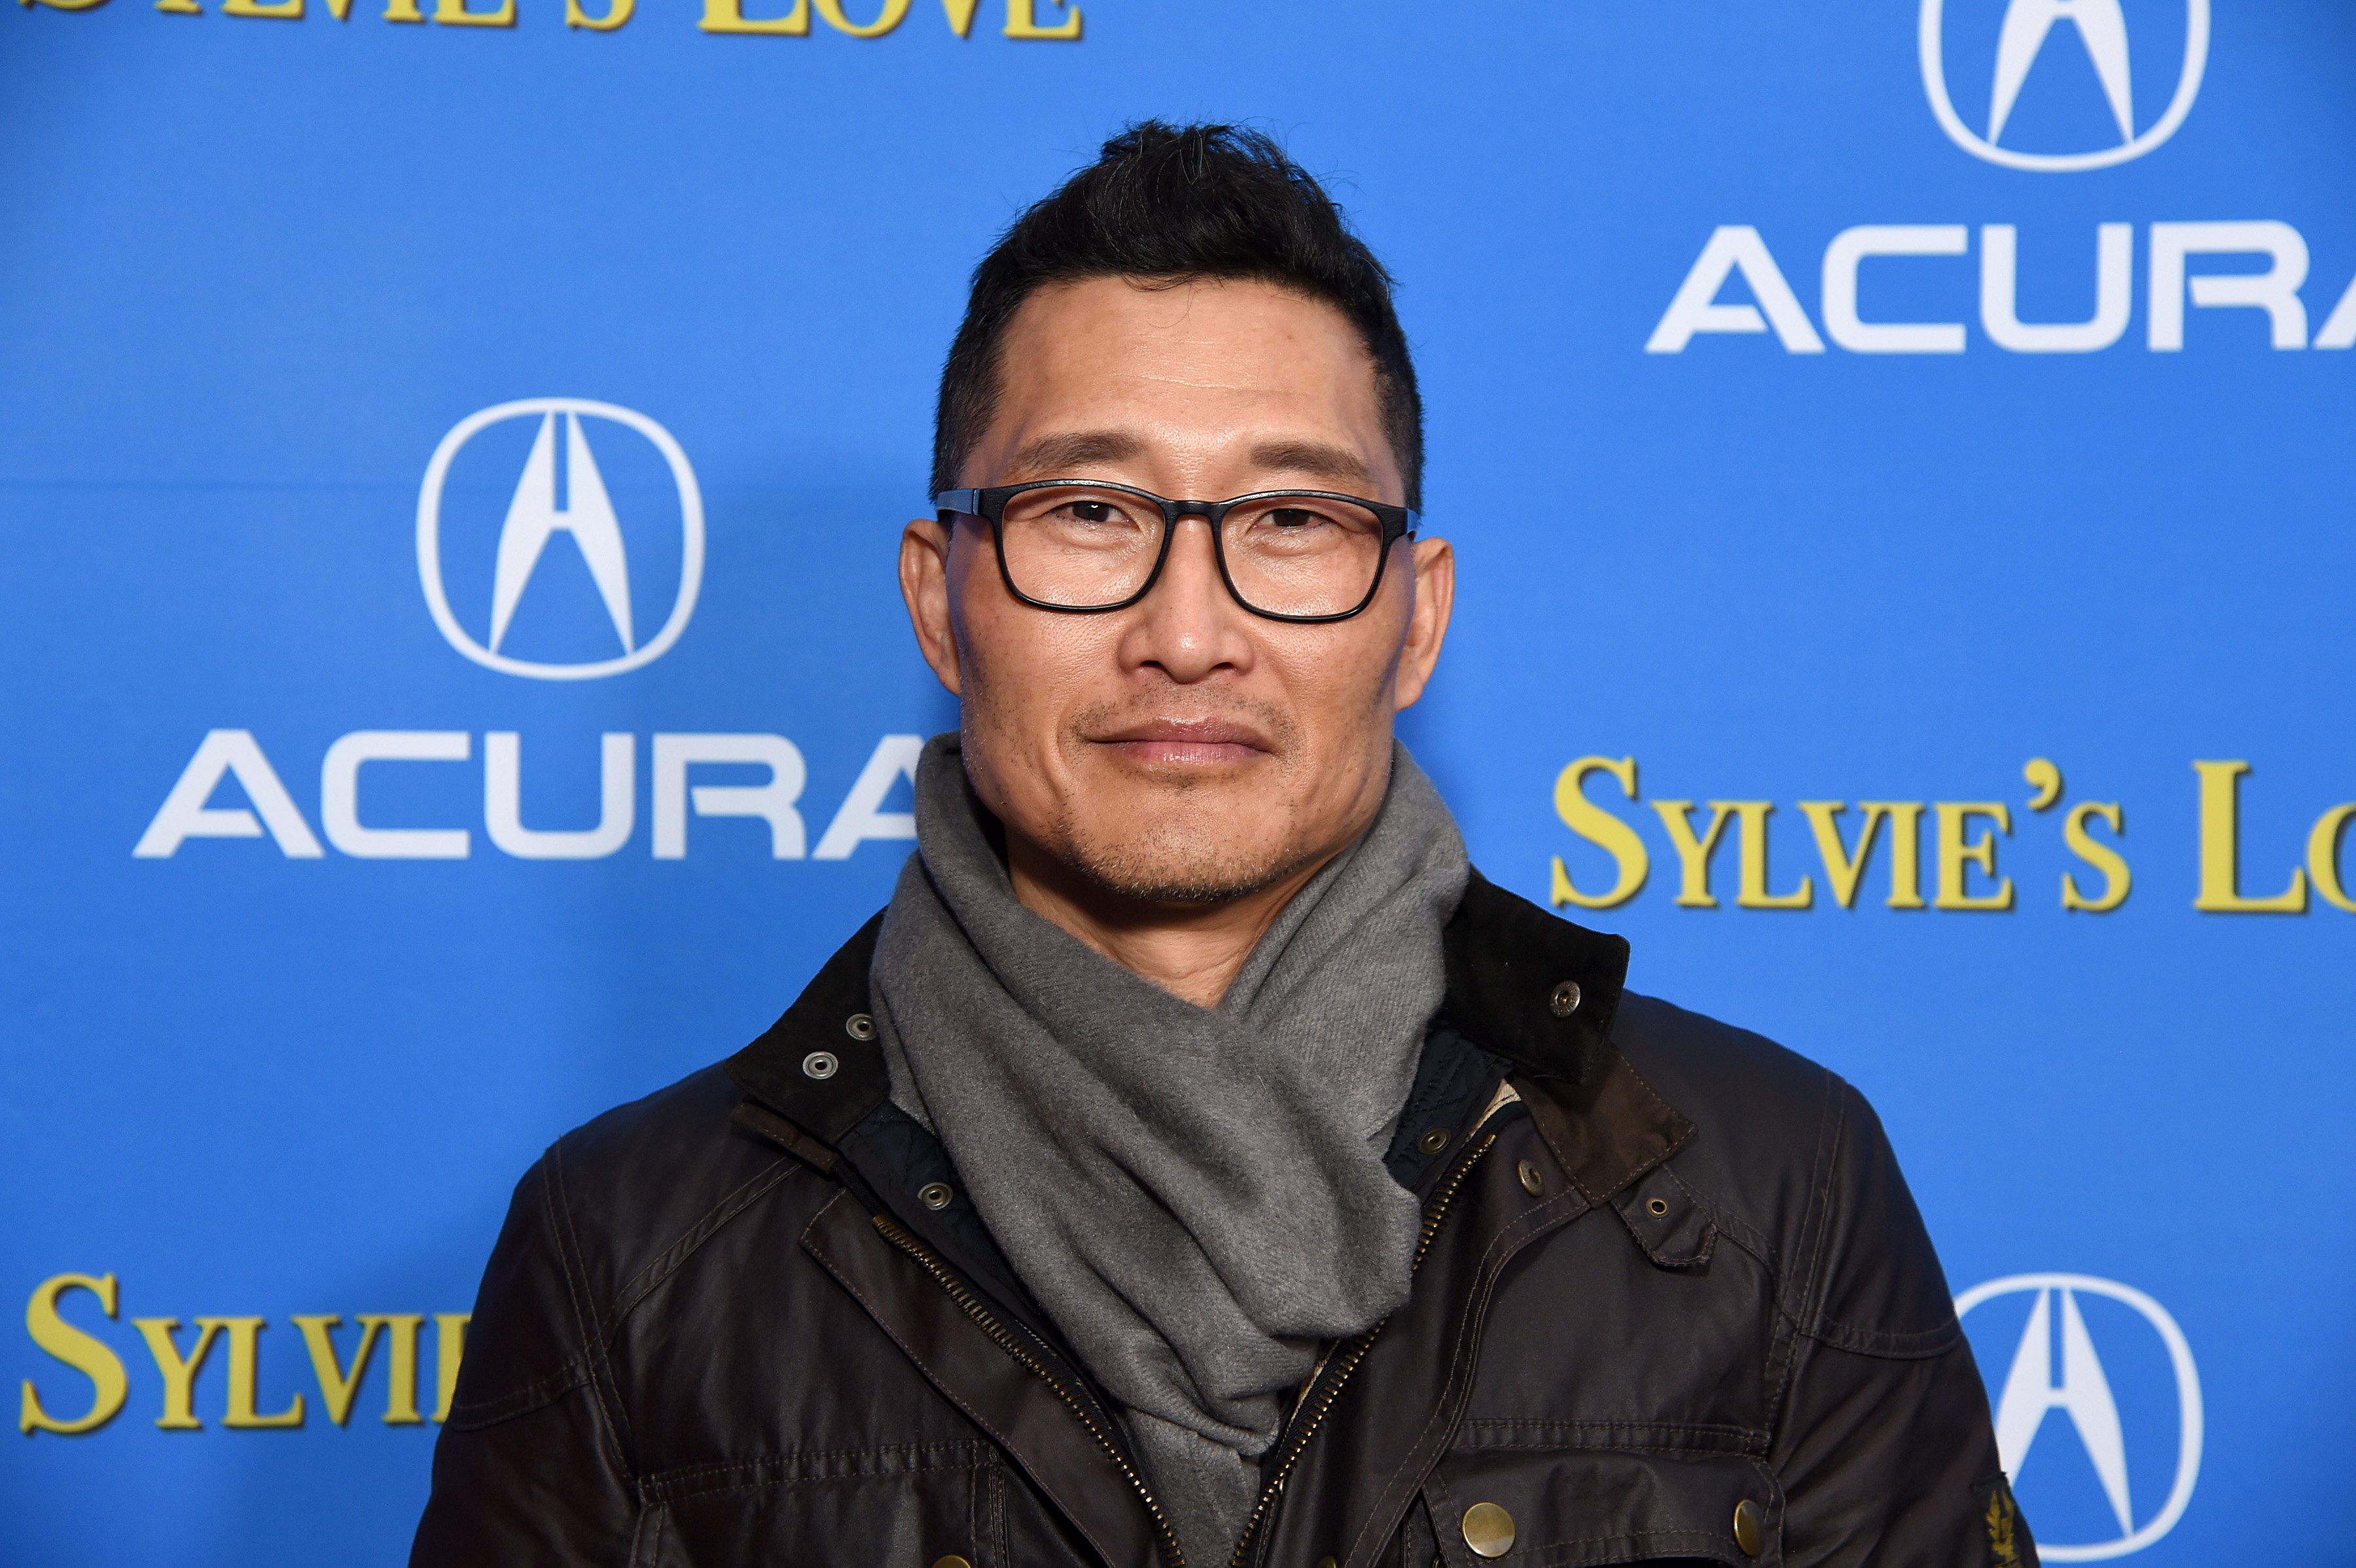 Daniel Dae Kim attends the after party for "Sylvie's Love" on January 27, 2020, in Park City, Utah. | Source: Getty Images.